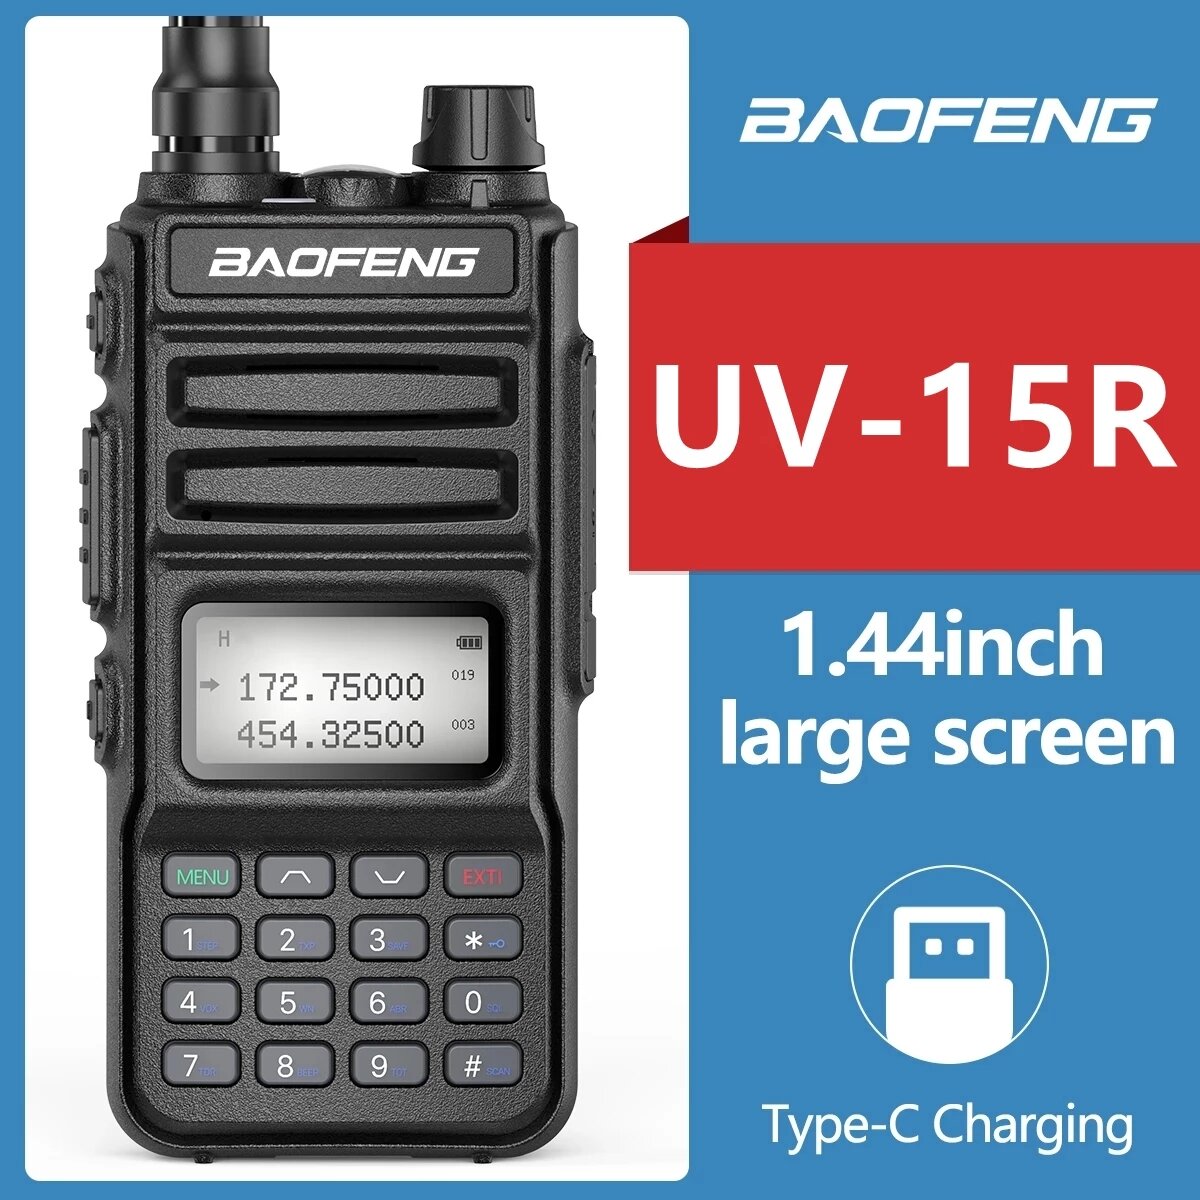 2022 Baofeng UV-15R Walkie Talkie 10W High Power 999 Channels Dual Band UHF VHF Radios Transmitter USB Charger Two Way R